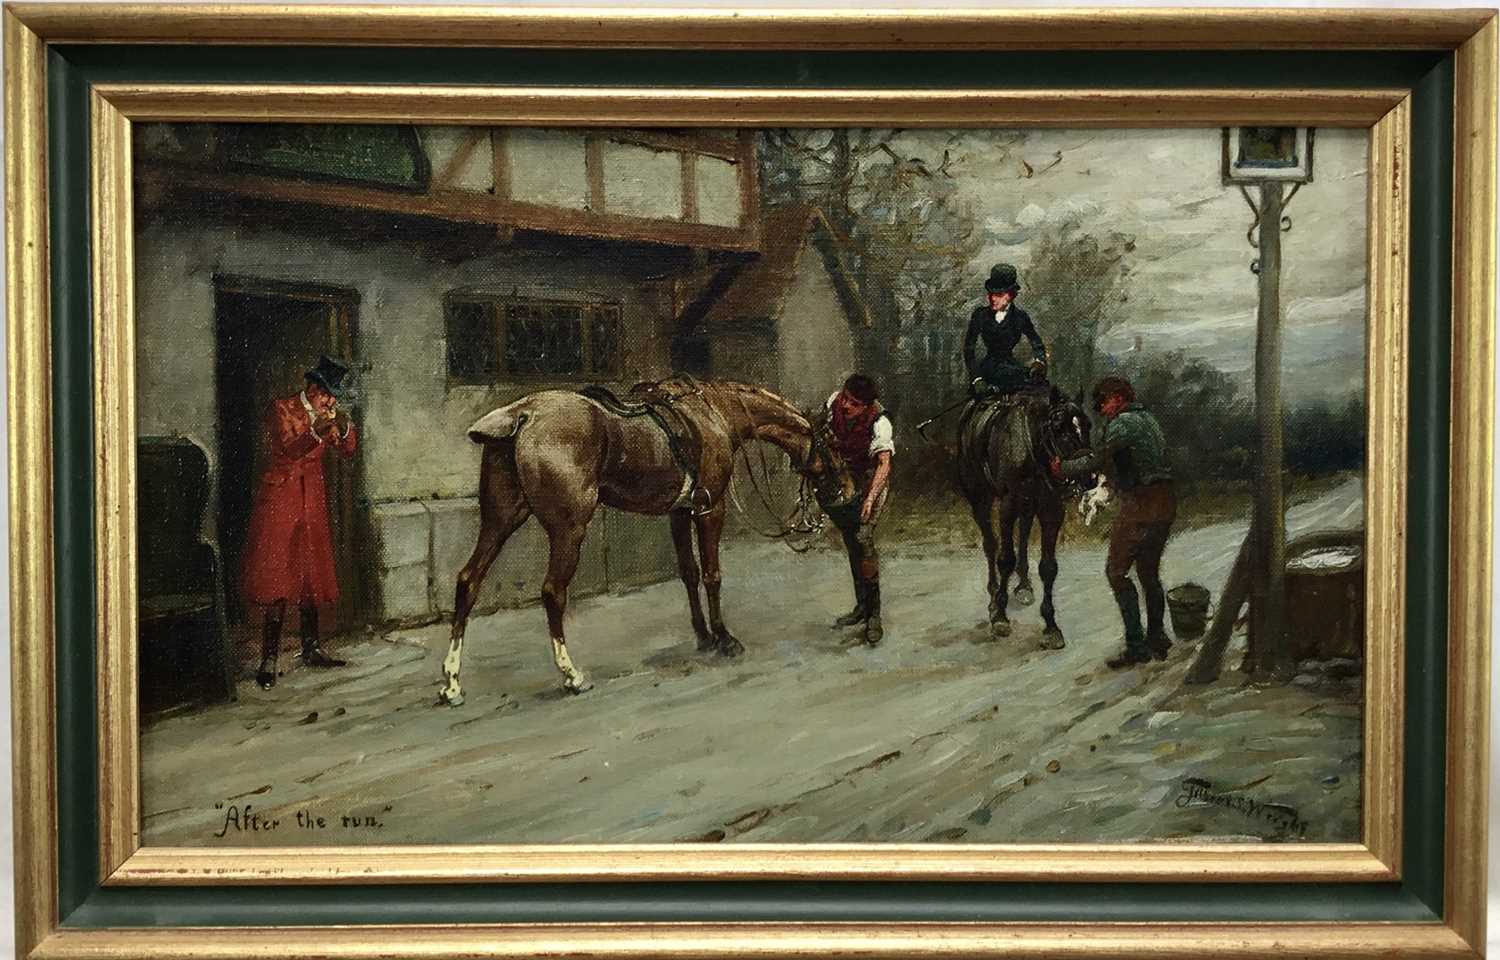 Filbert S. Wright 19th century, oil on canvas, "After the Run", huntsmen and horses by an inn, sign